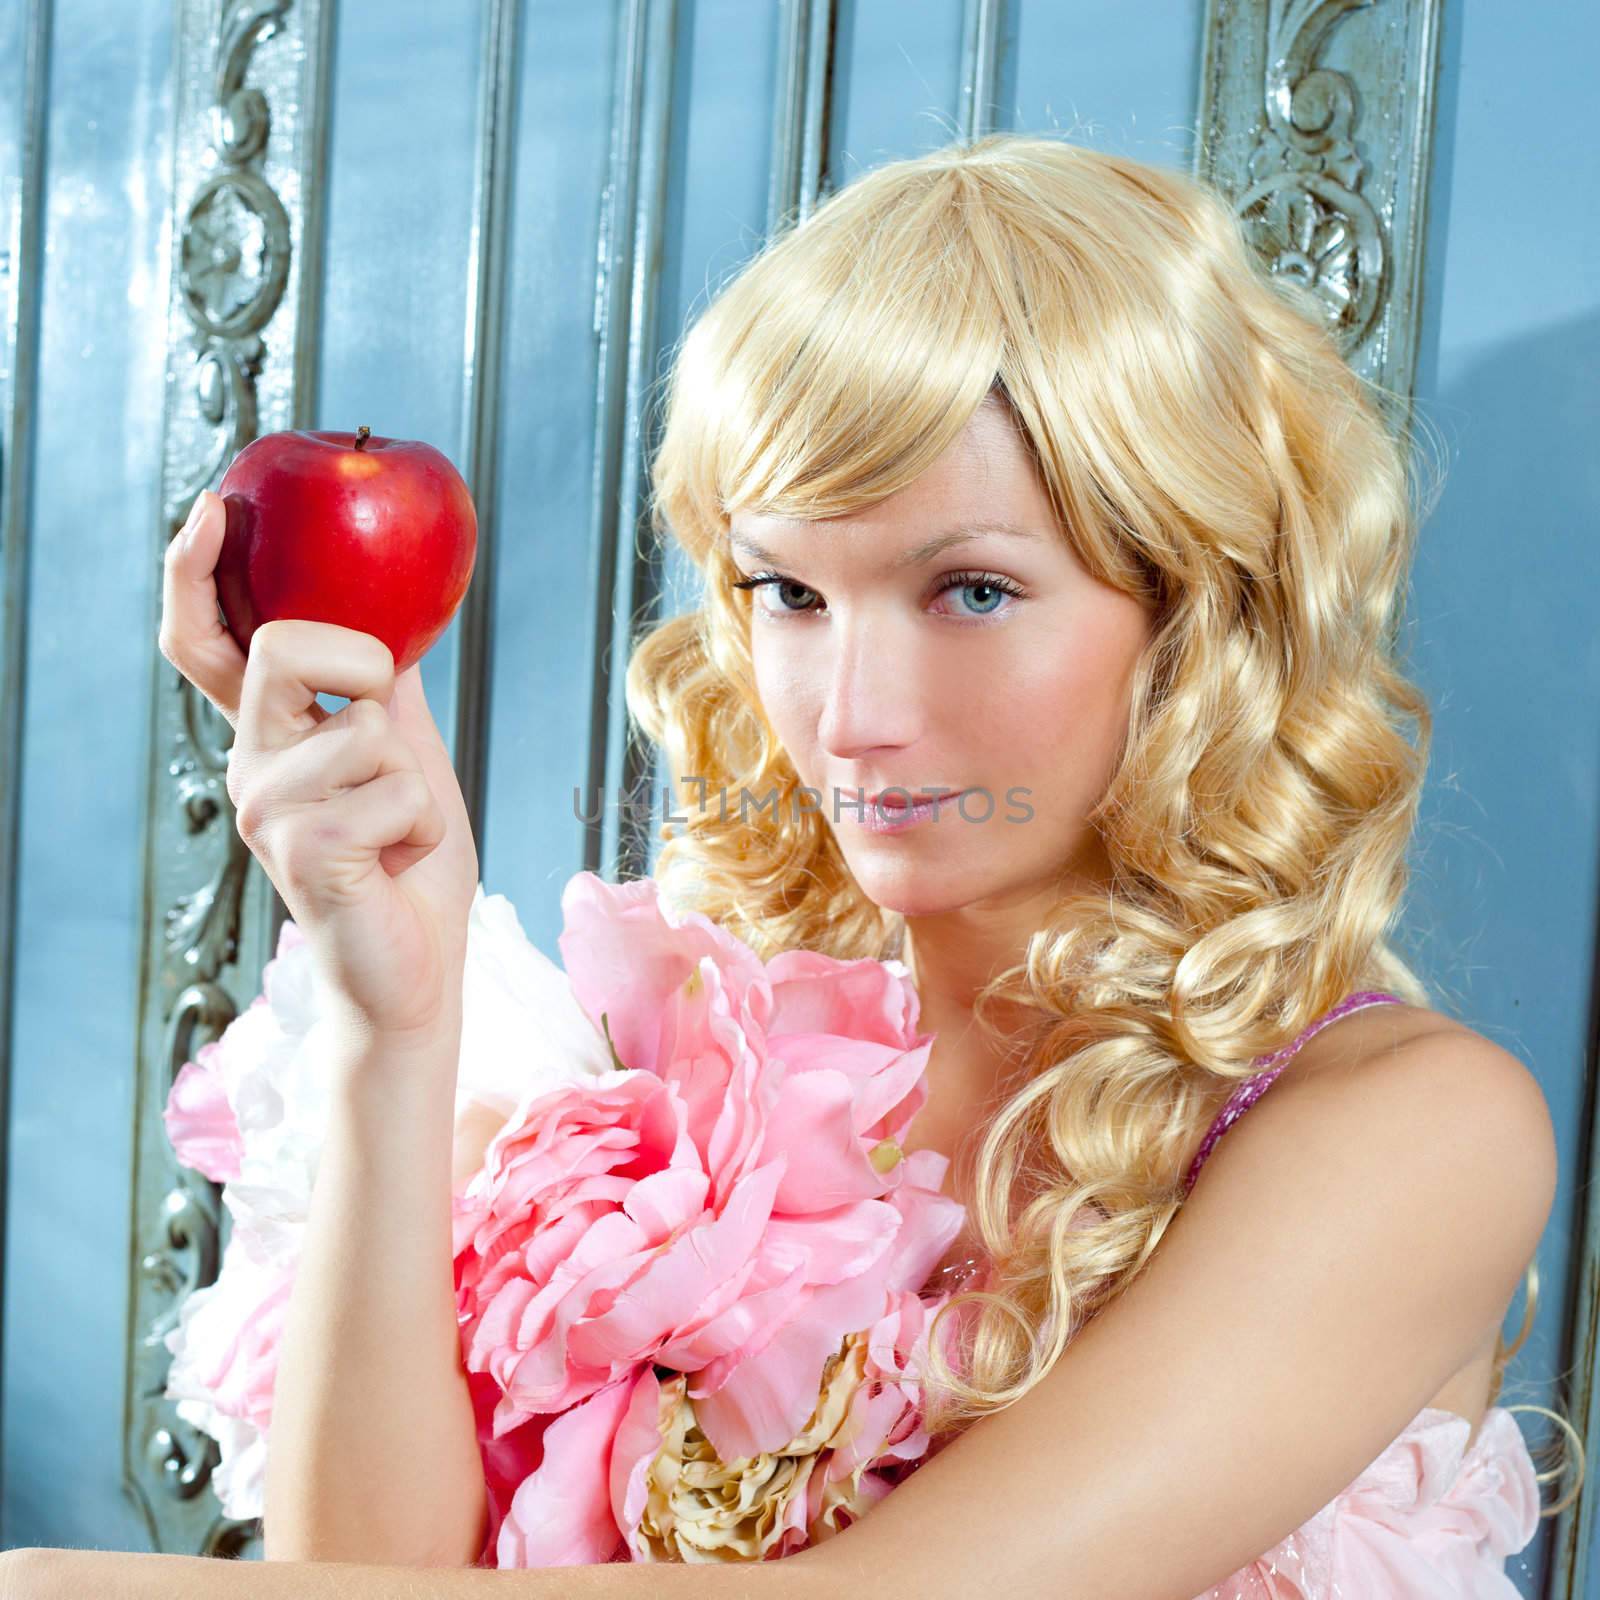 blond fashion princess eating apple with flowers dres by lunamarina